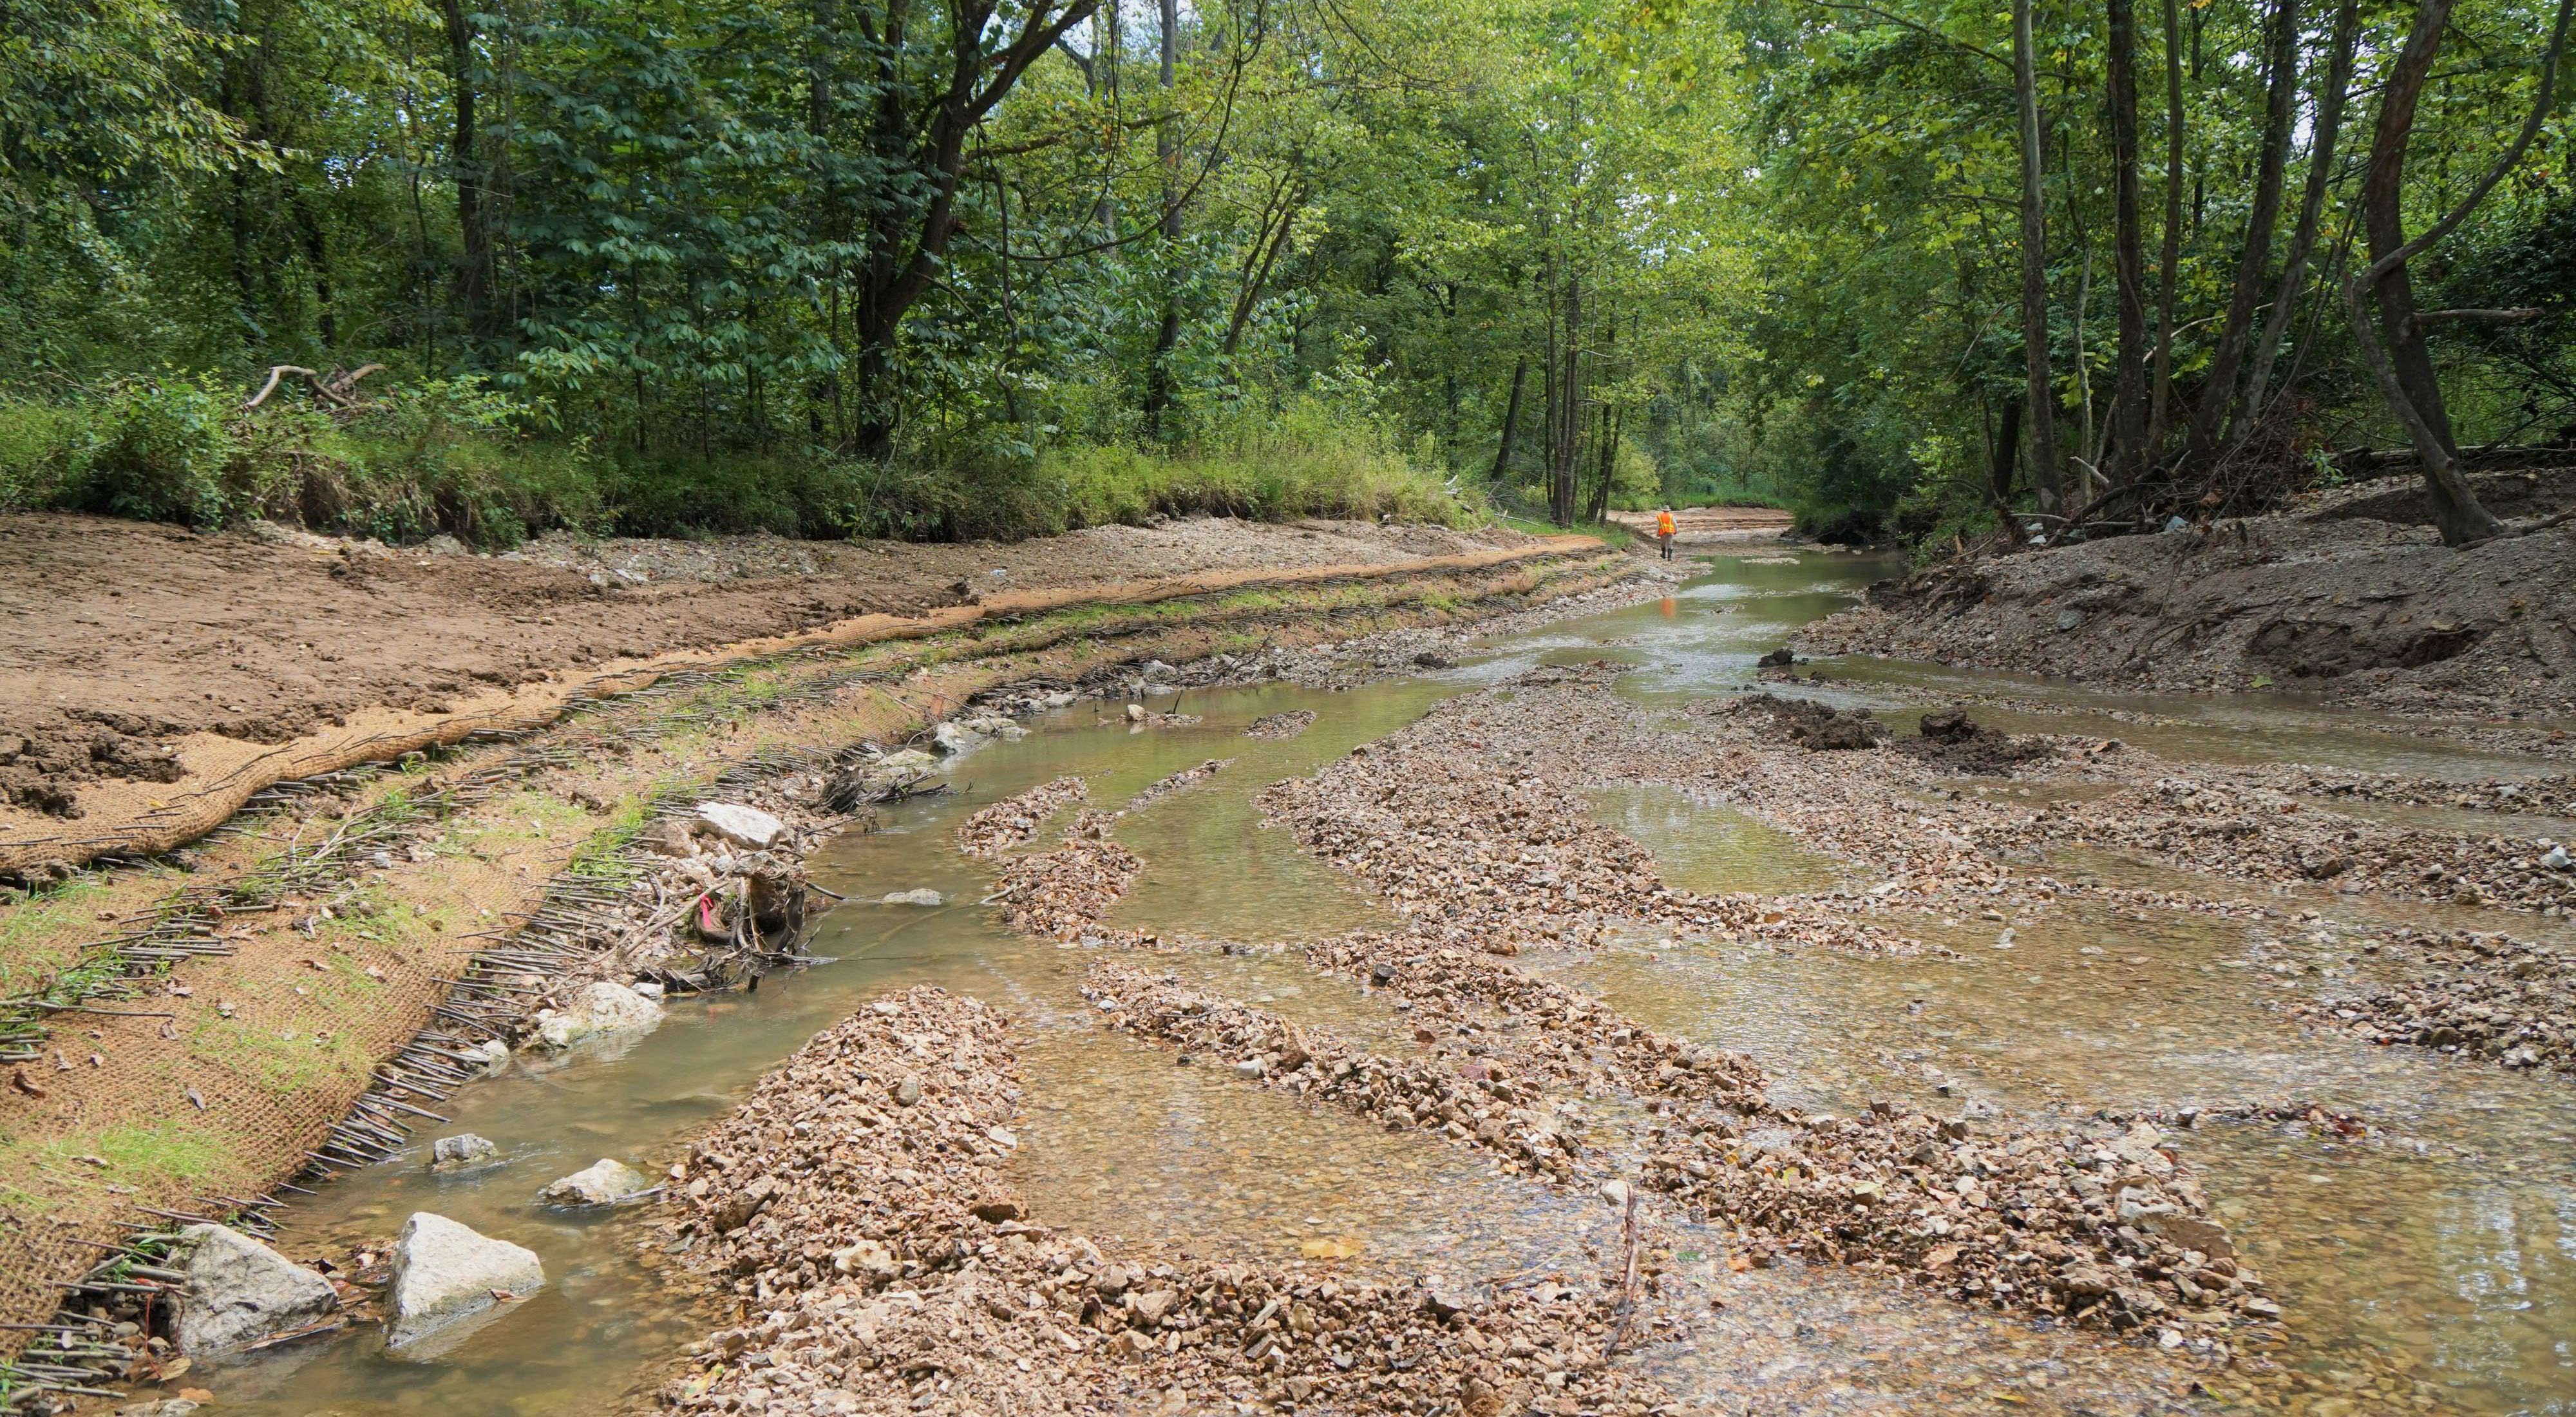 Newly constructed stream bank along Kiefer Creek in Castlewood State Park.